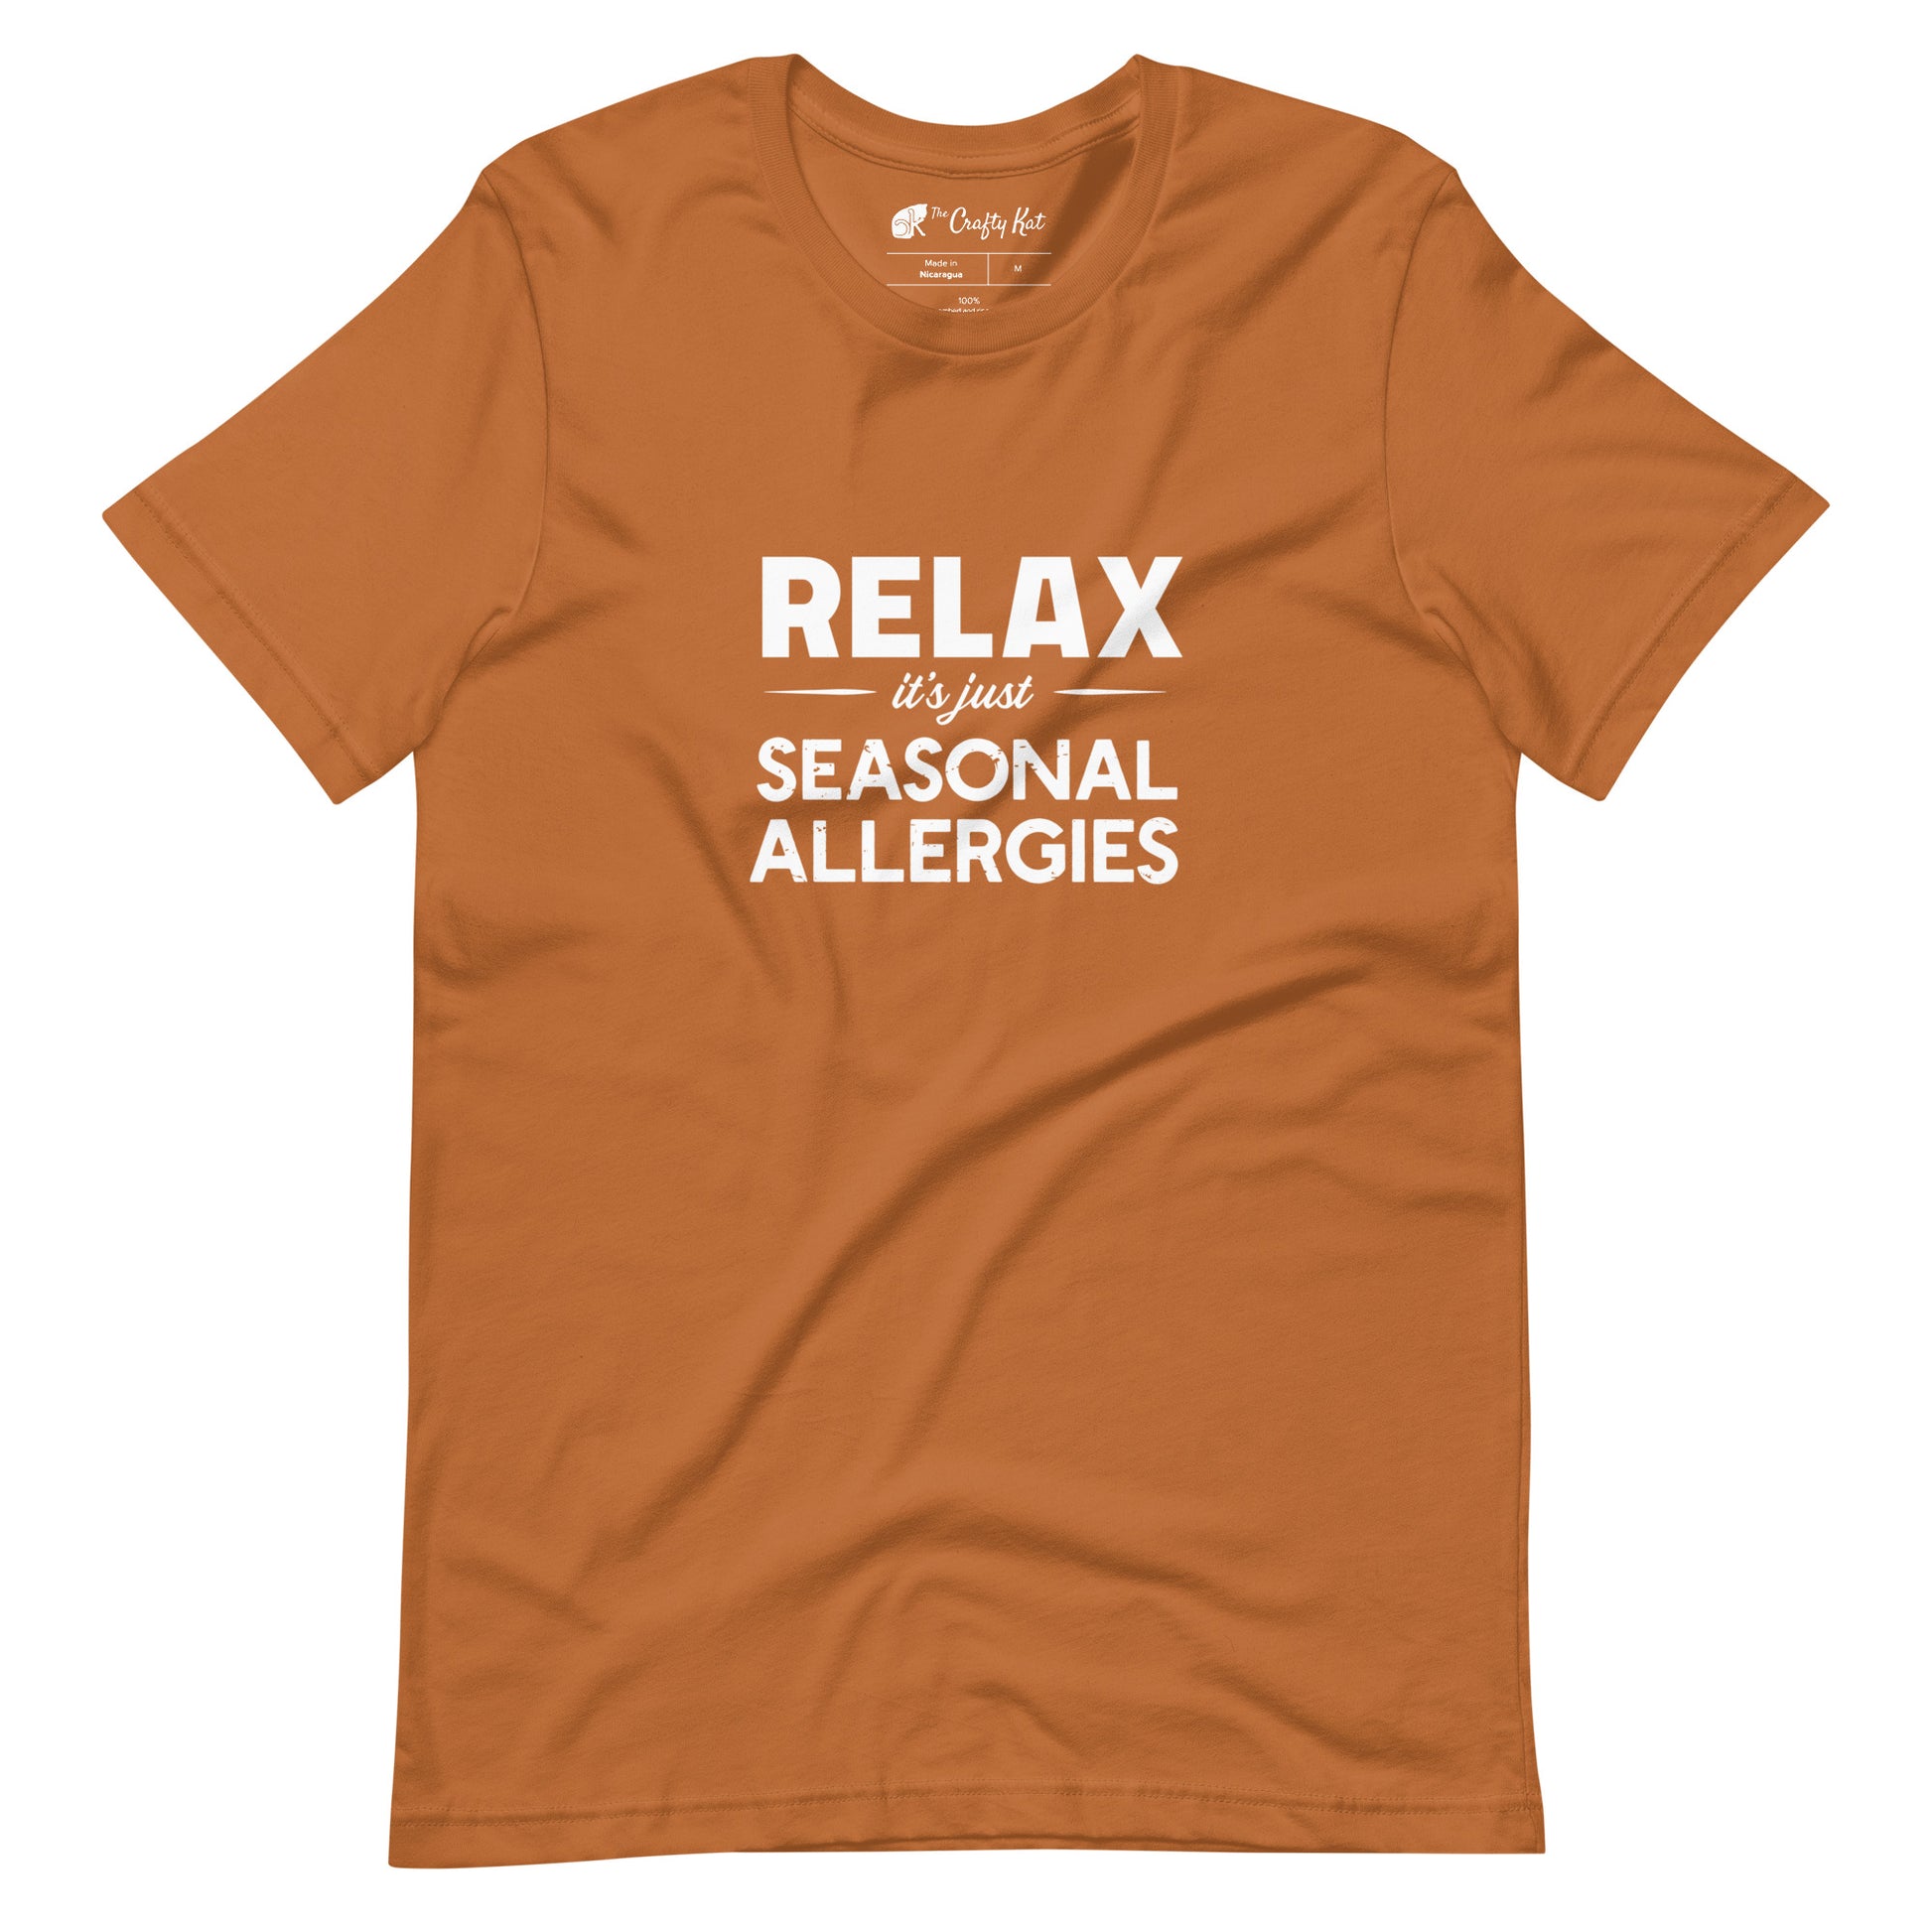 Toast (yellow orange) t-shirt with white graphic: "RELAX it's just SEASONAL ALLERGIES"